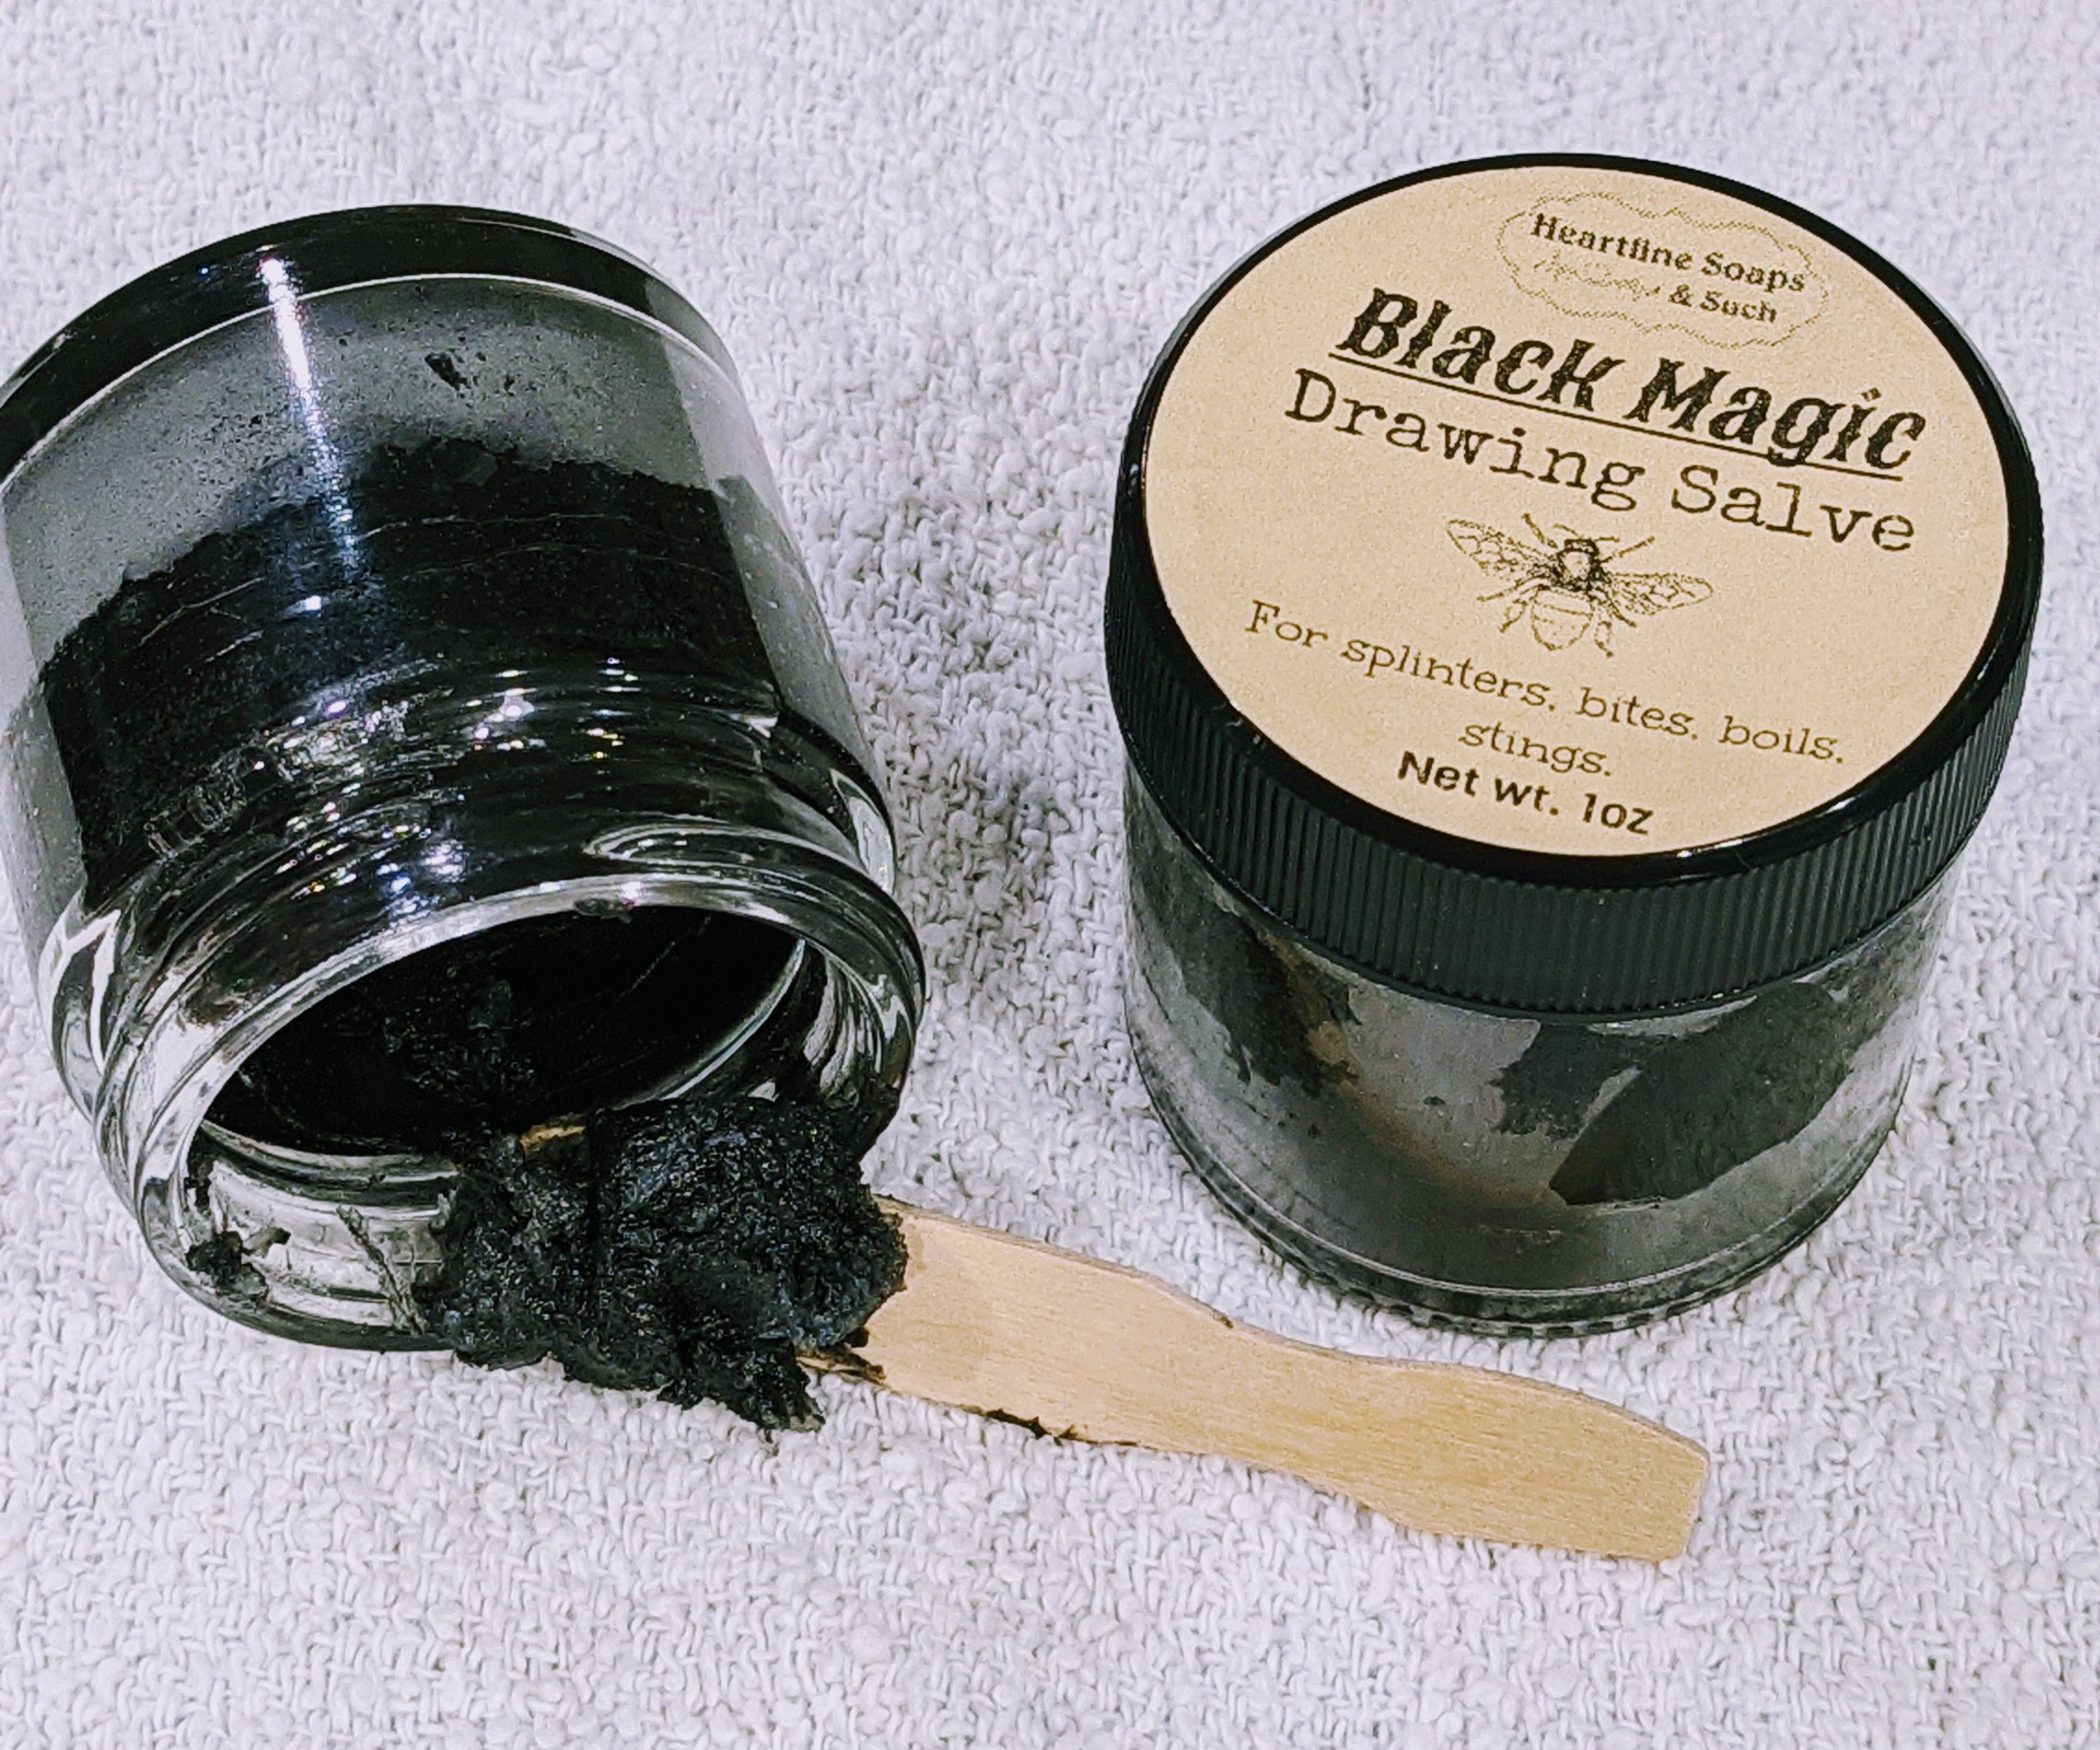 Black Magic drawing salve – Heartline Soaps & Such